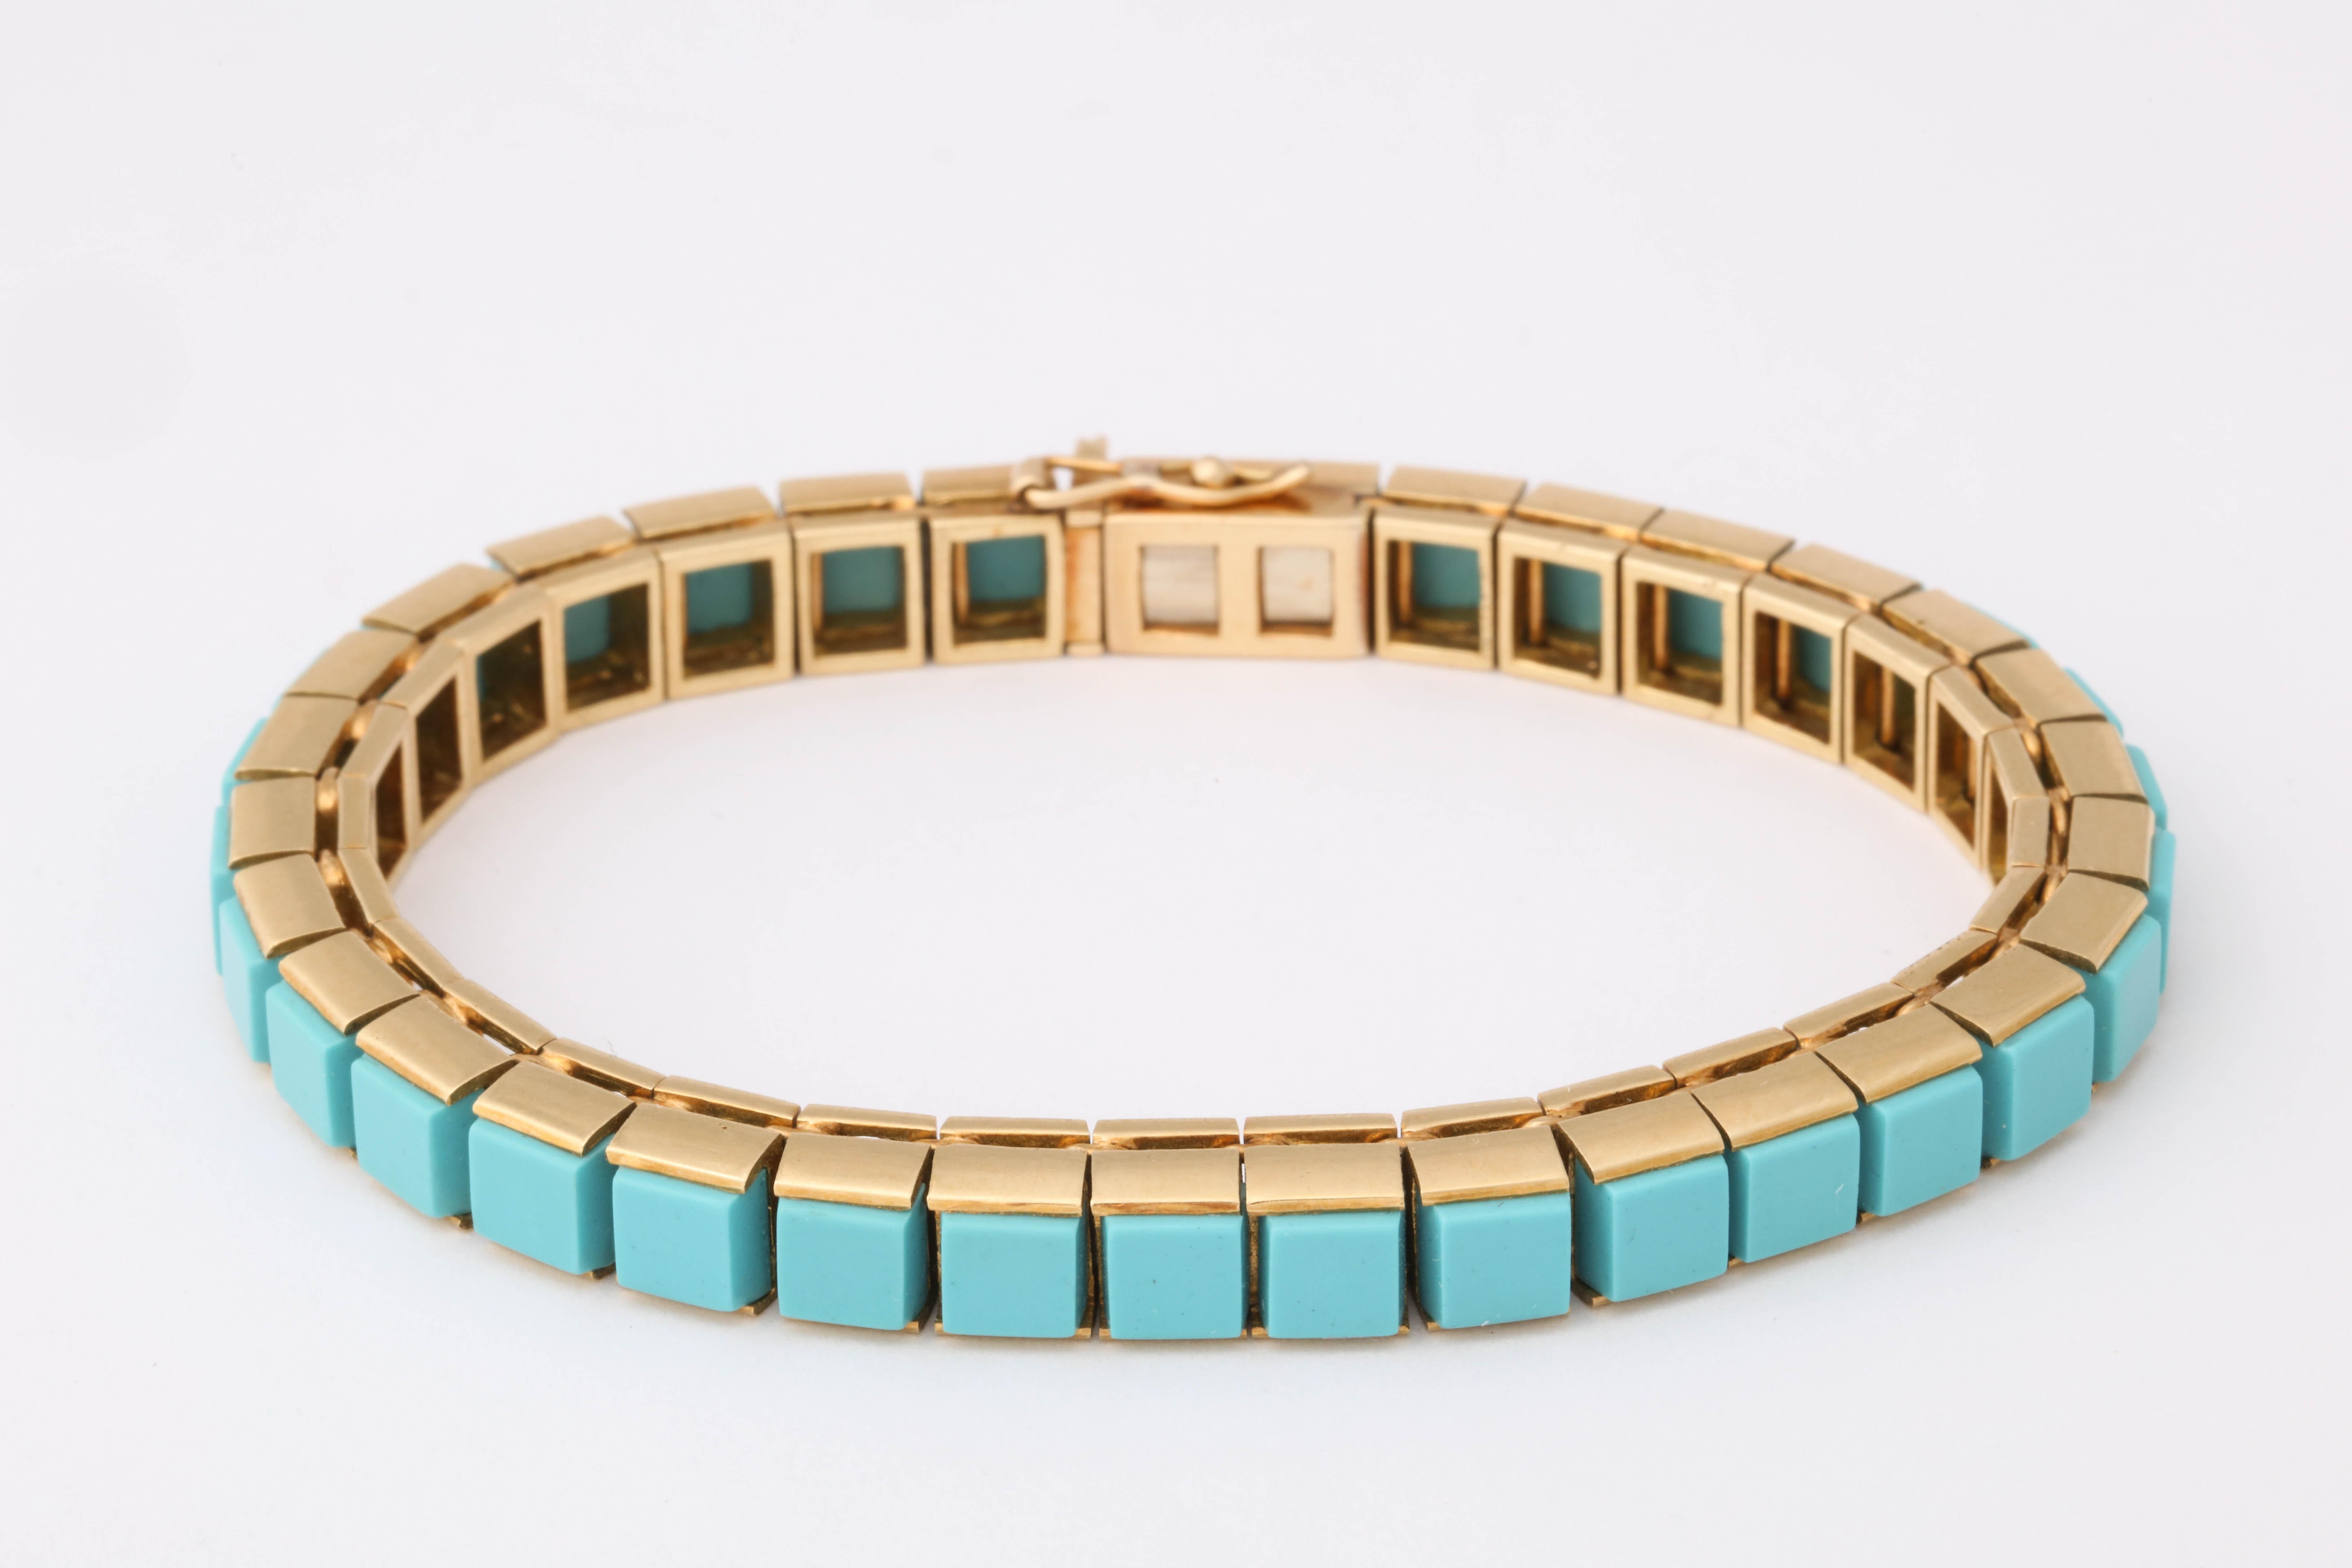 Dating to c.1965, this turquoise bracelet consists of 33 stones cut flat on the top. A beautiful line bracelet set in 18K yellow gold. 